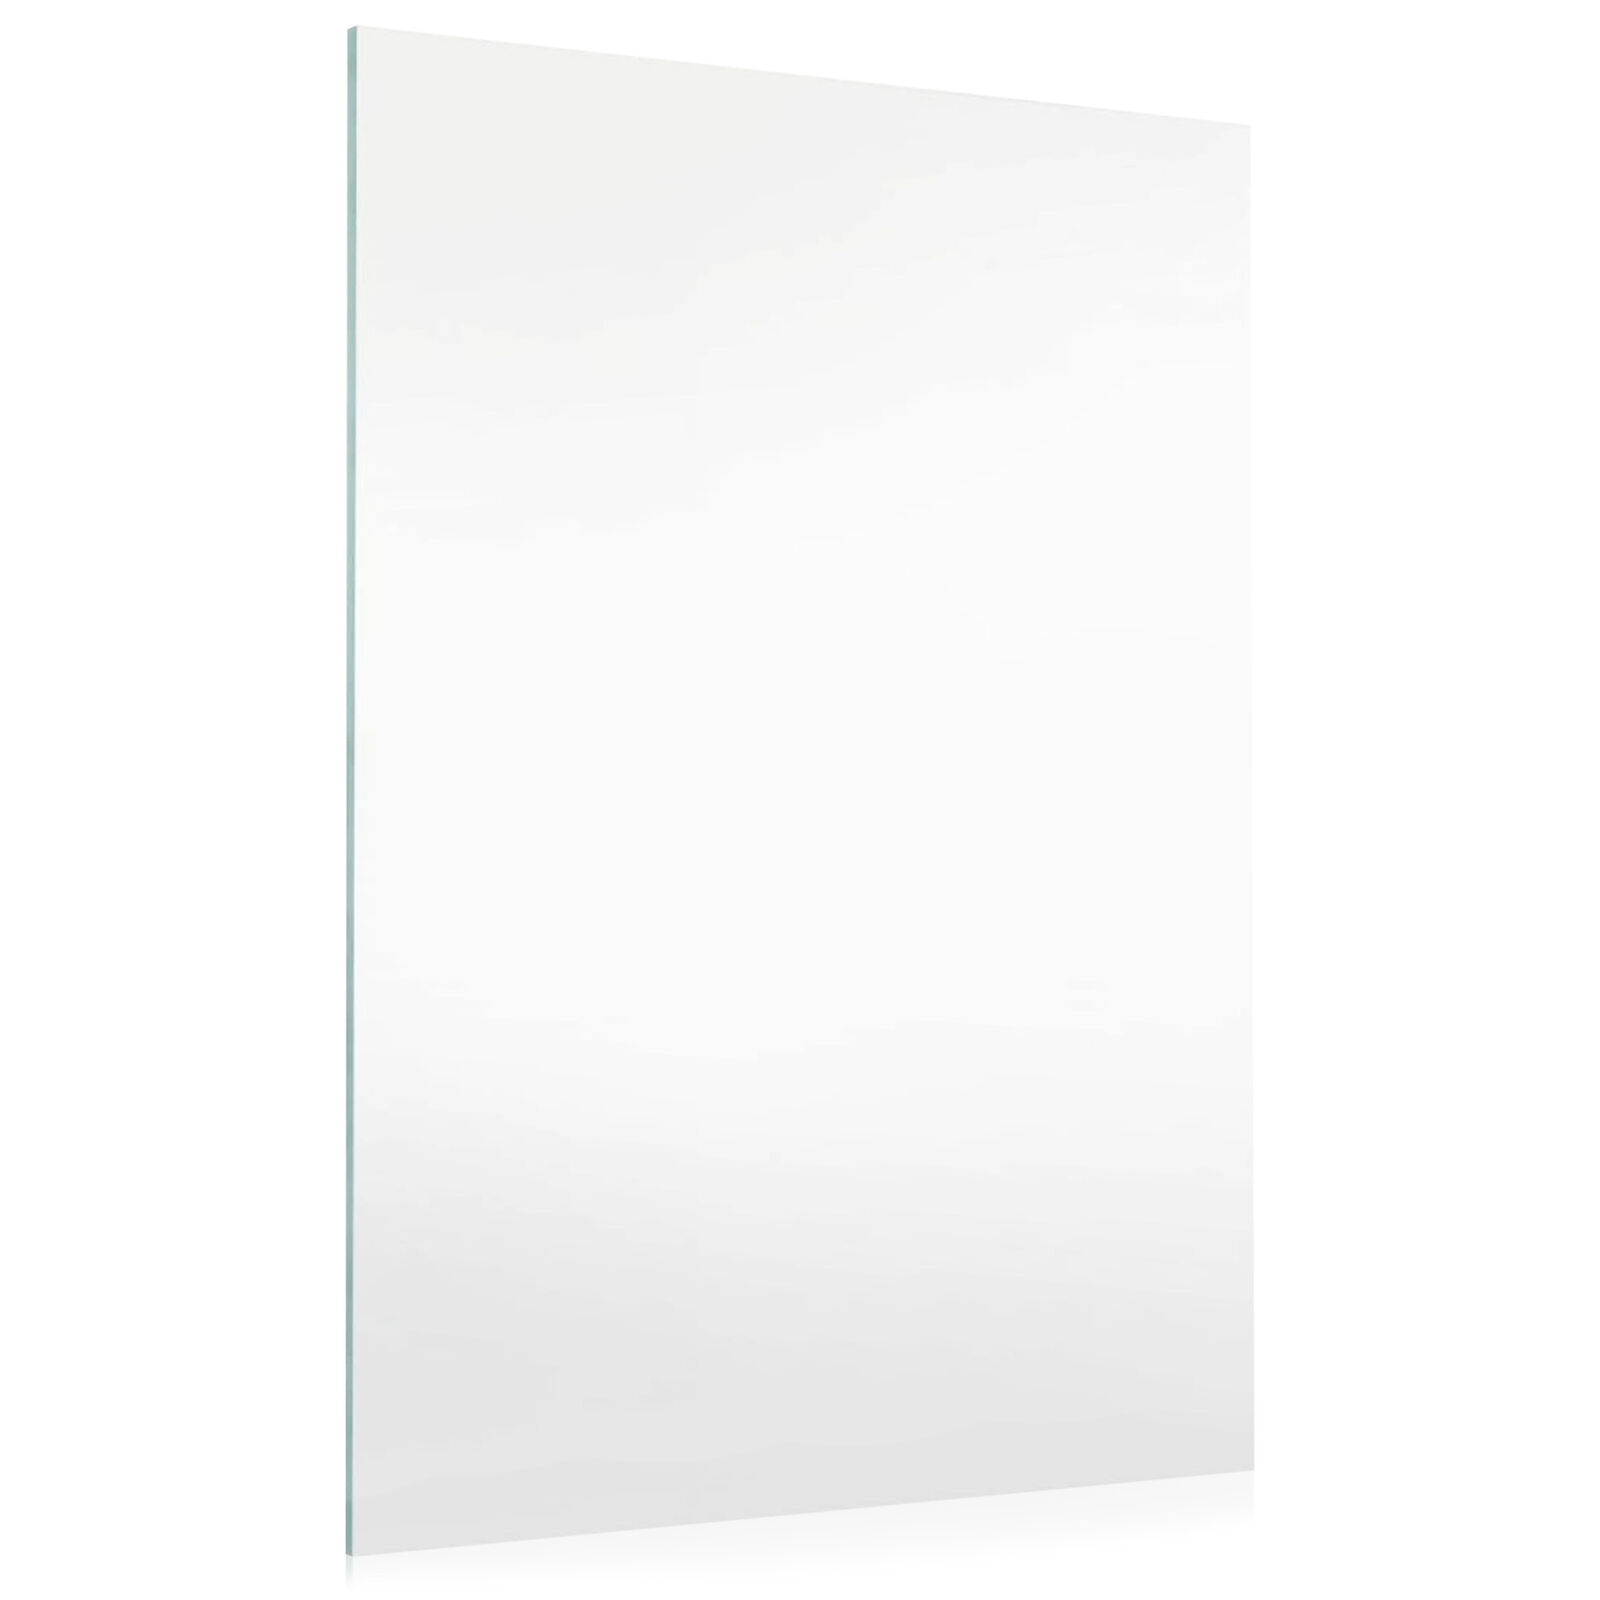 Non-Glare Uv-Resistant Frame-Grade Acrylic Replacement For 16x20 Picture Frame